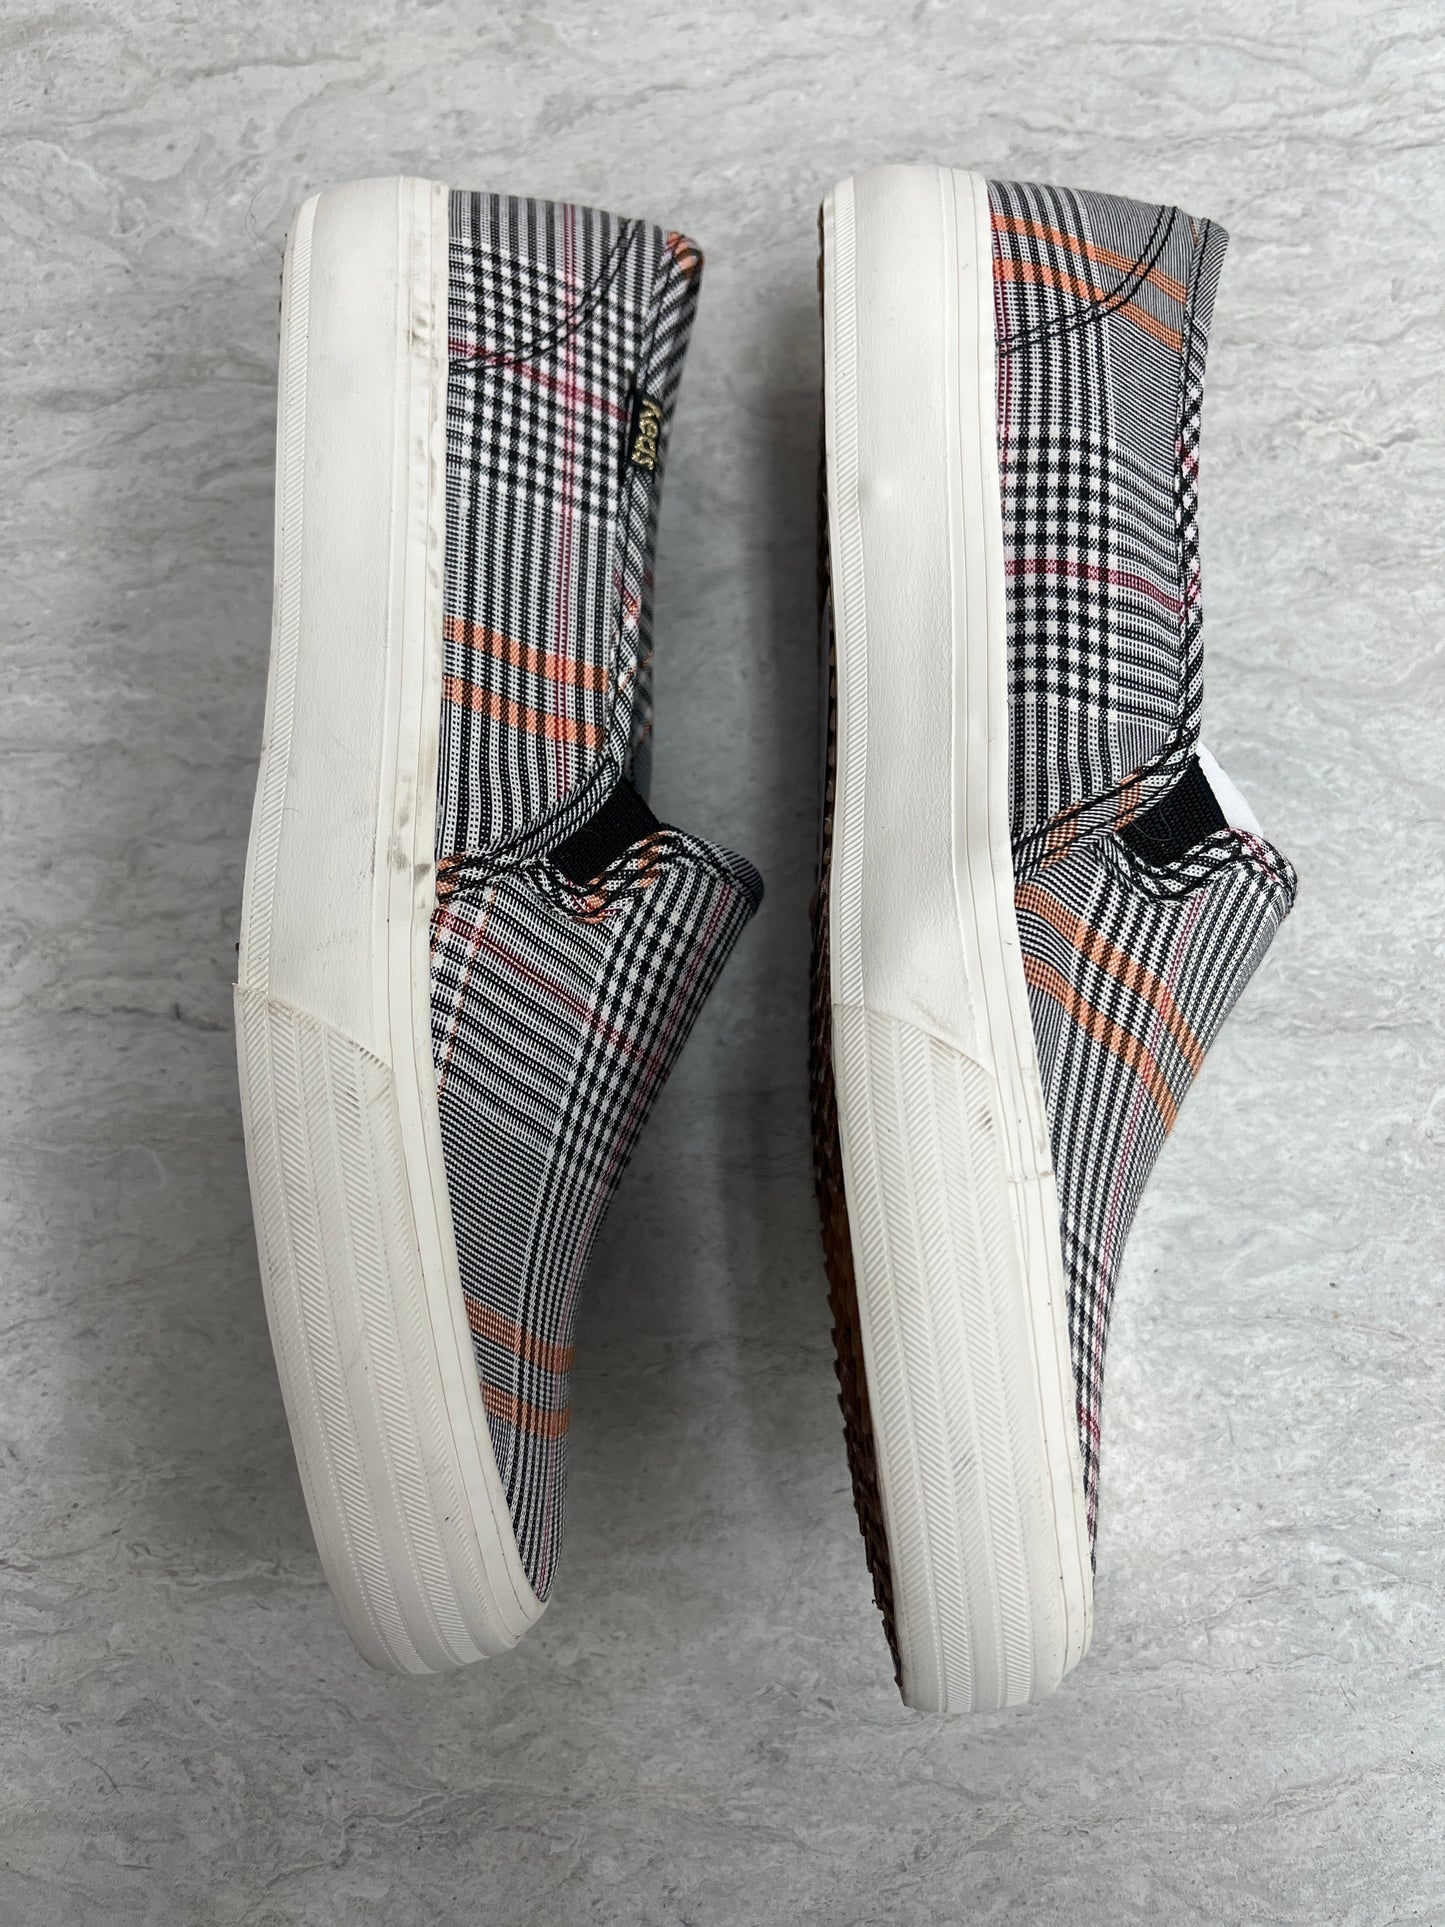 Plaid Pattern Shoes Sneakers Keds, Size 7